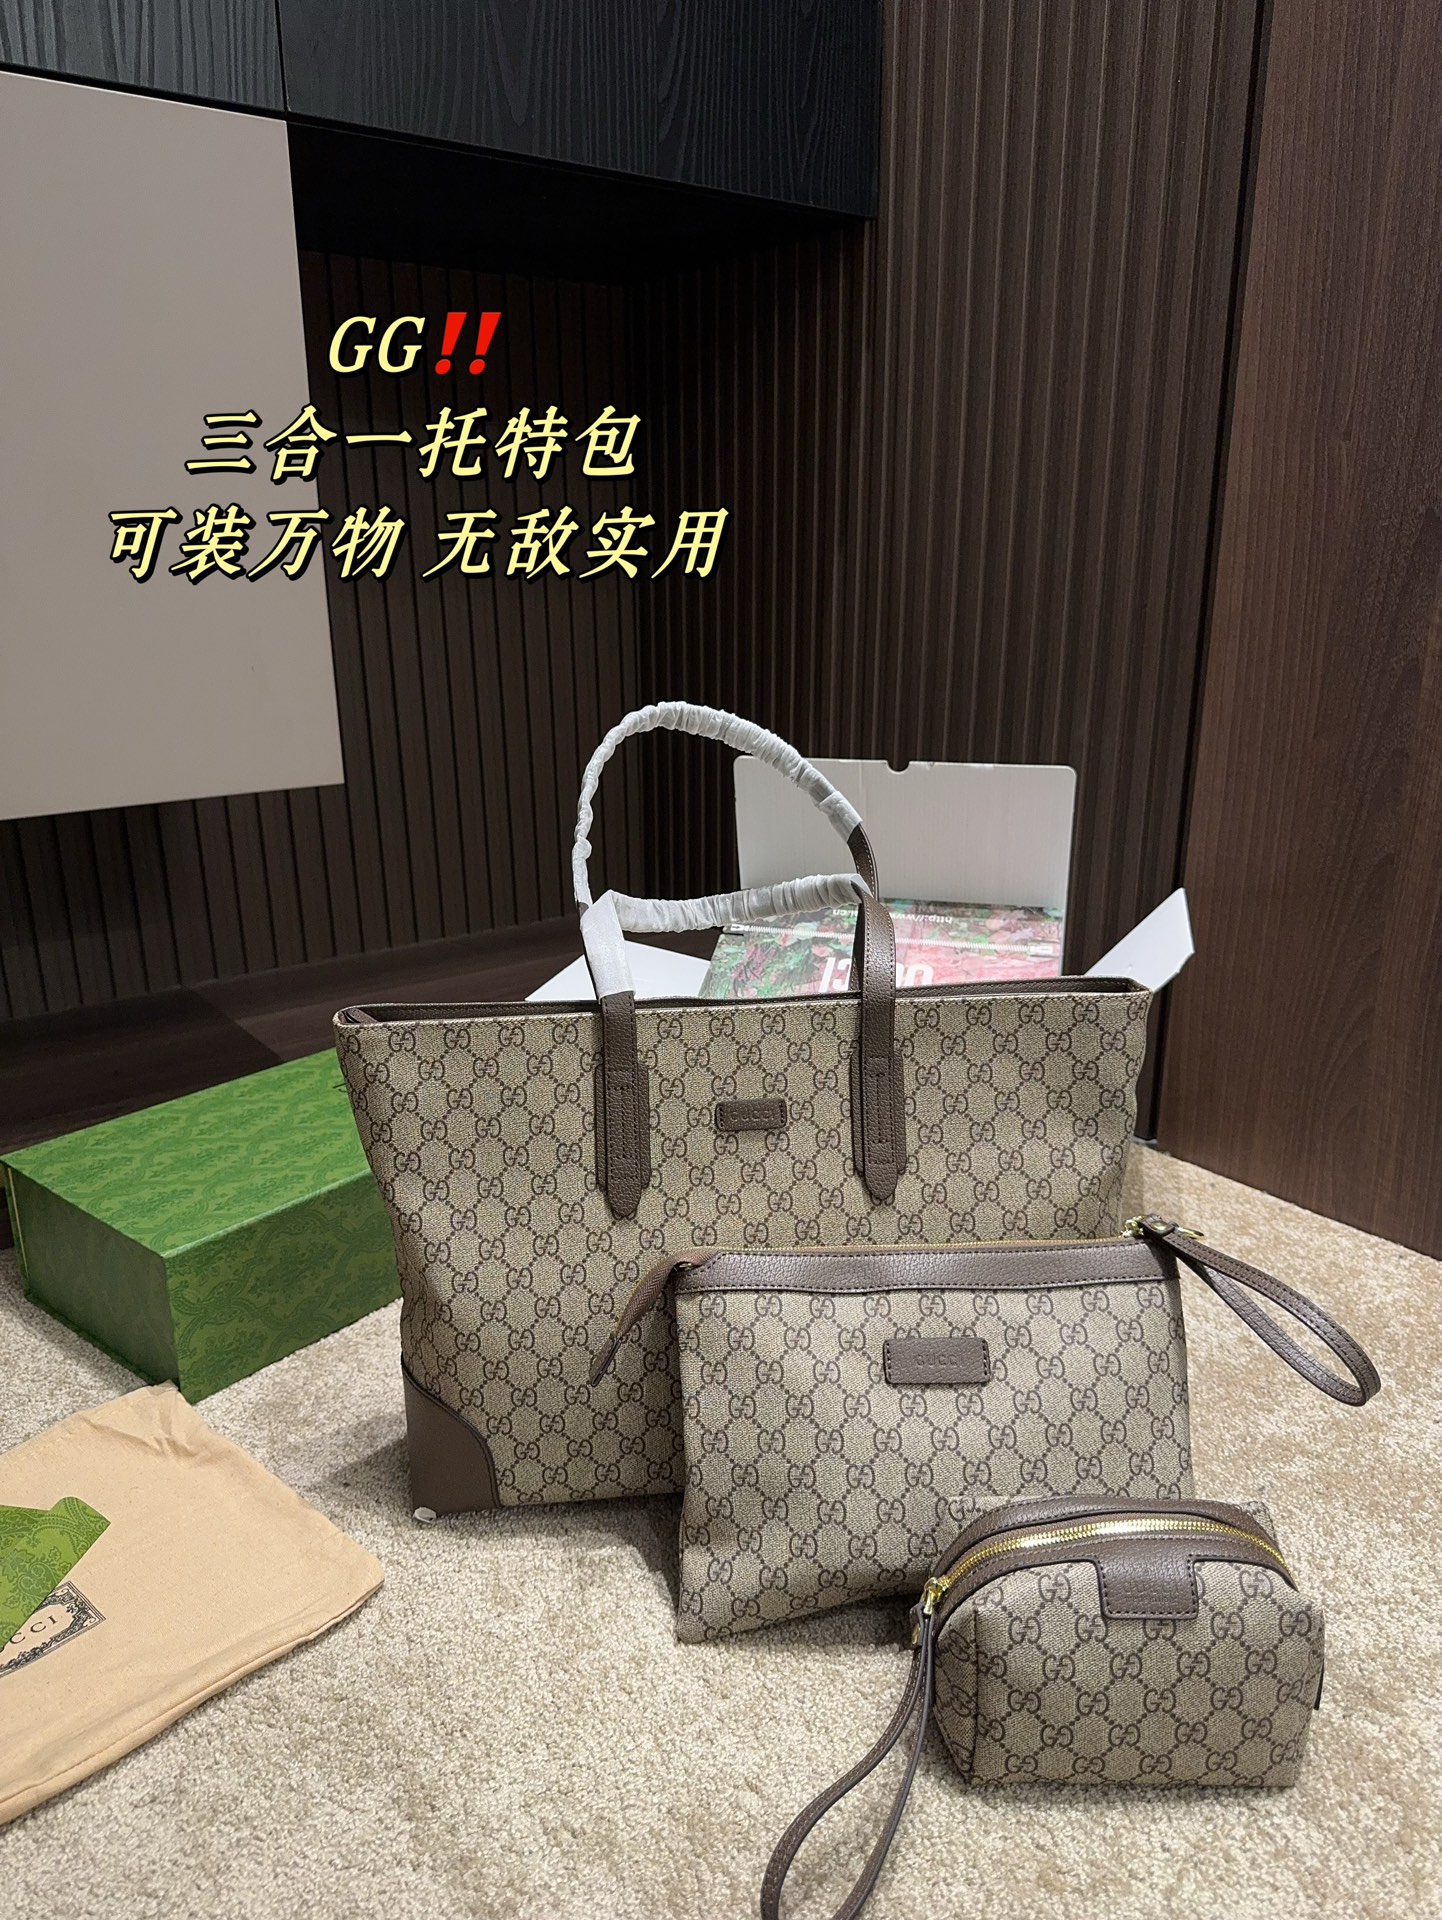 Gucci Handbags Clutches & Pouch Bags Cosmetic Bags Tote Bags Fashion